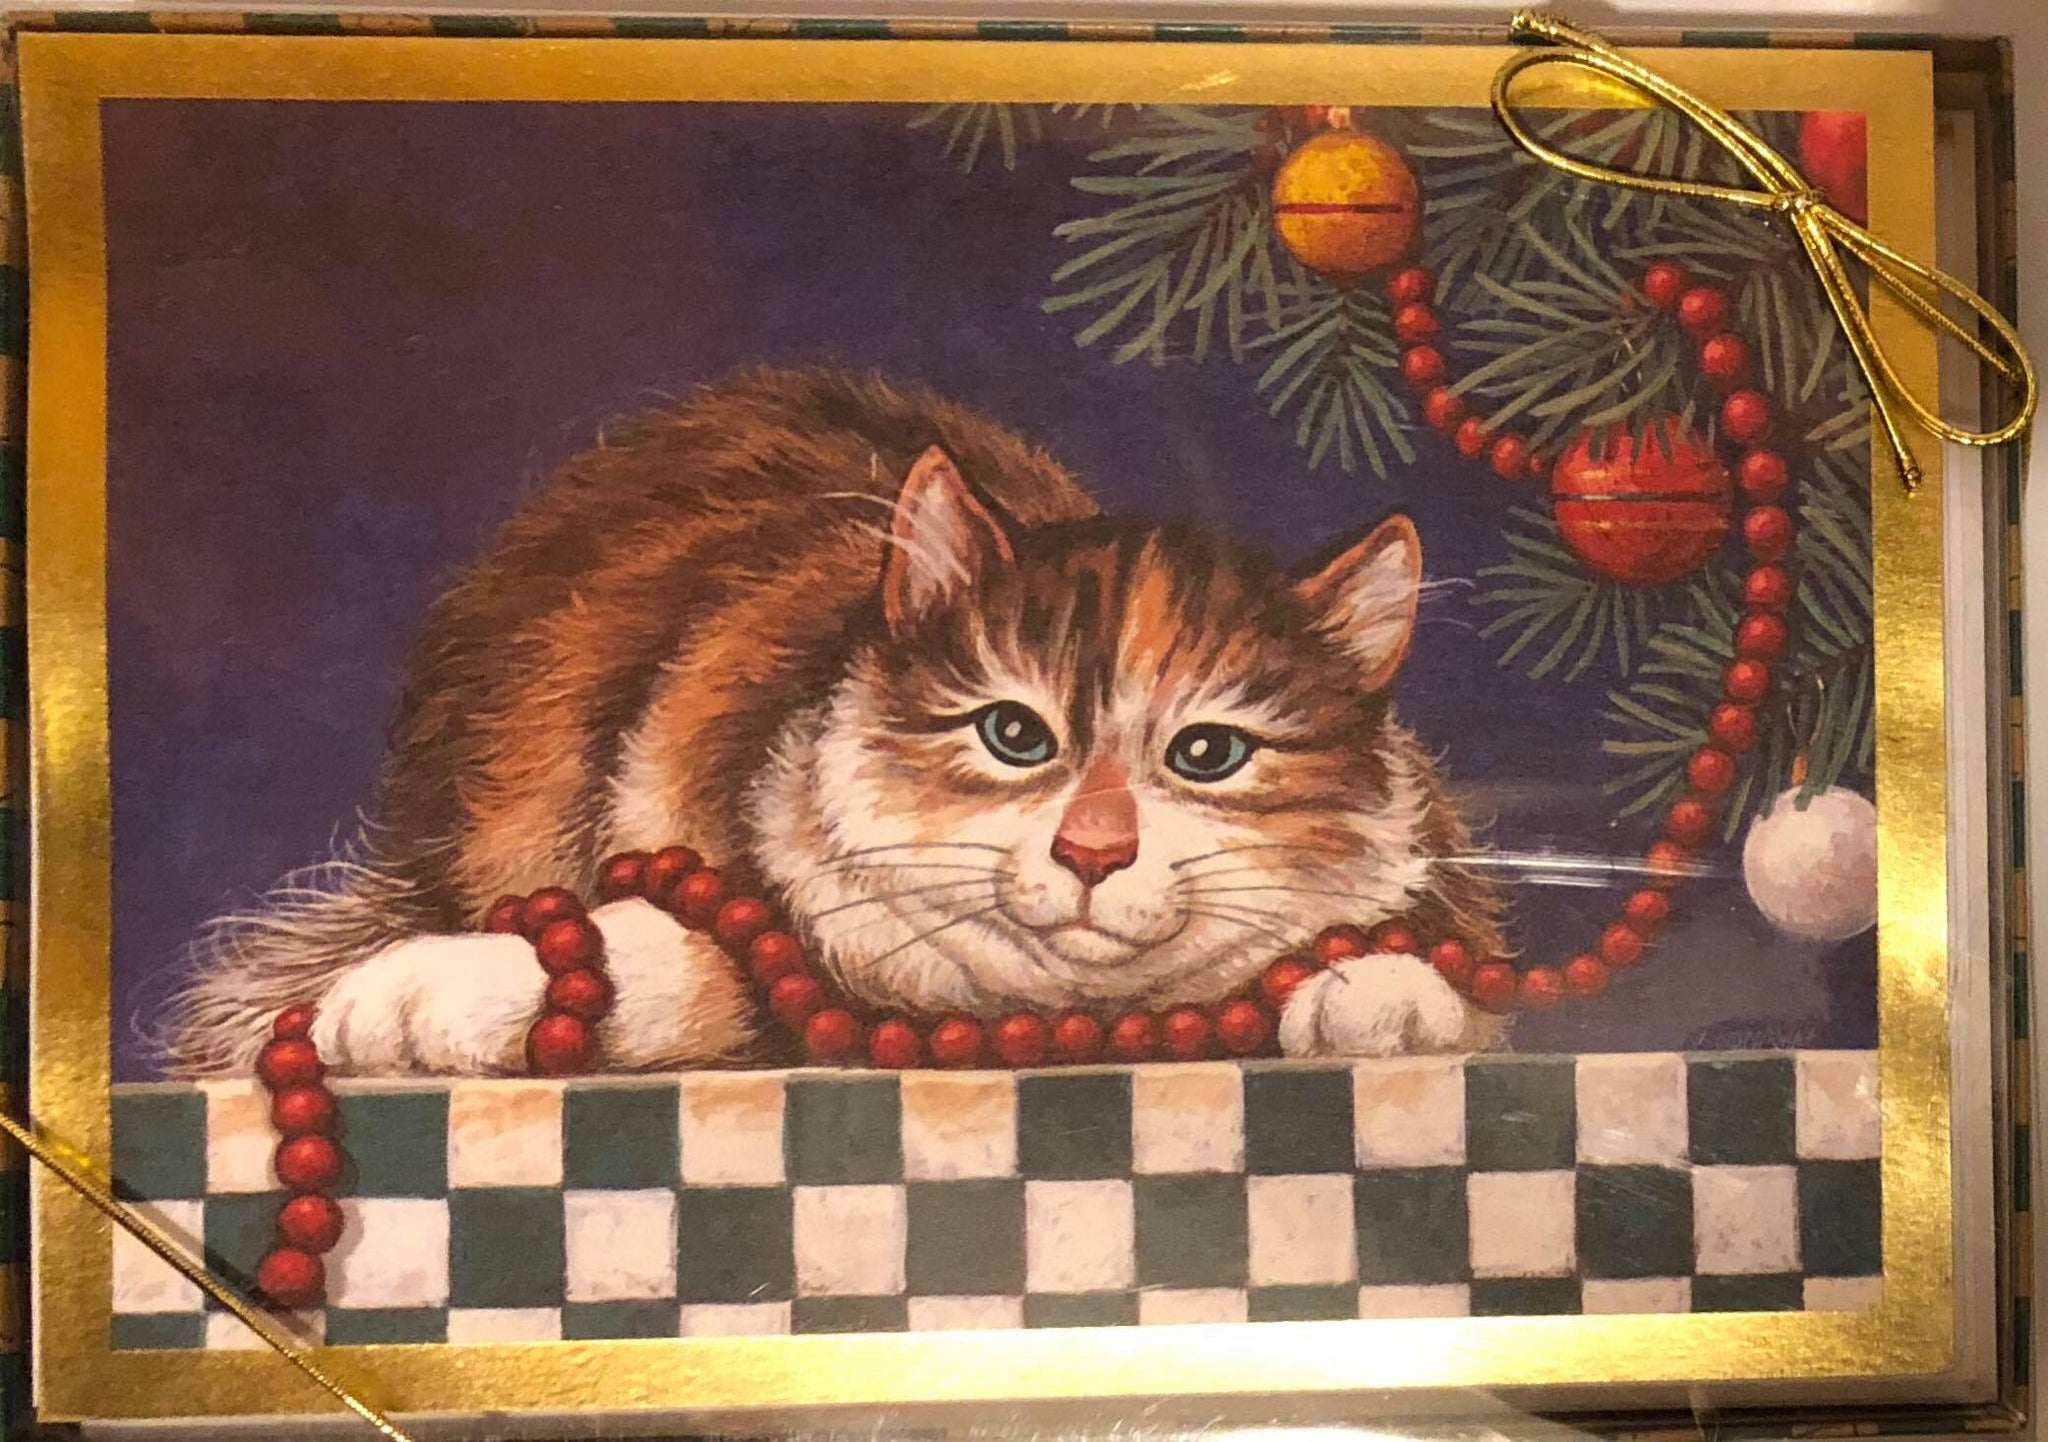 Boxed Christmas Card "Cat under Christmas tree"